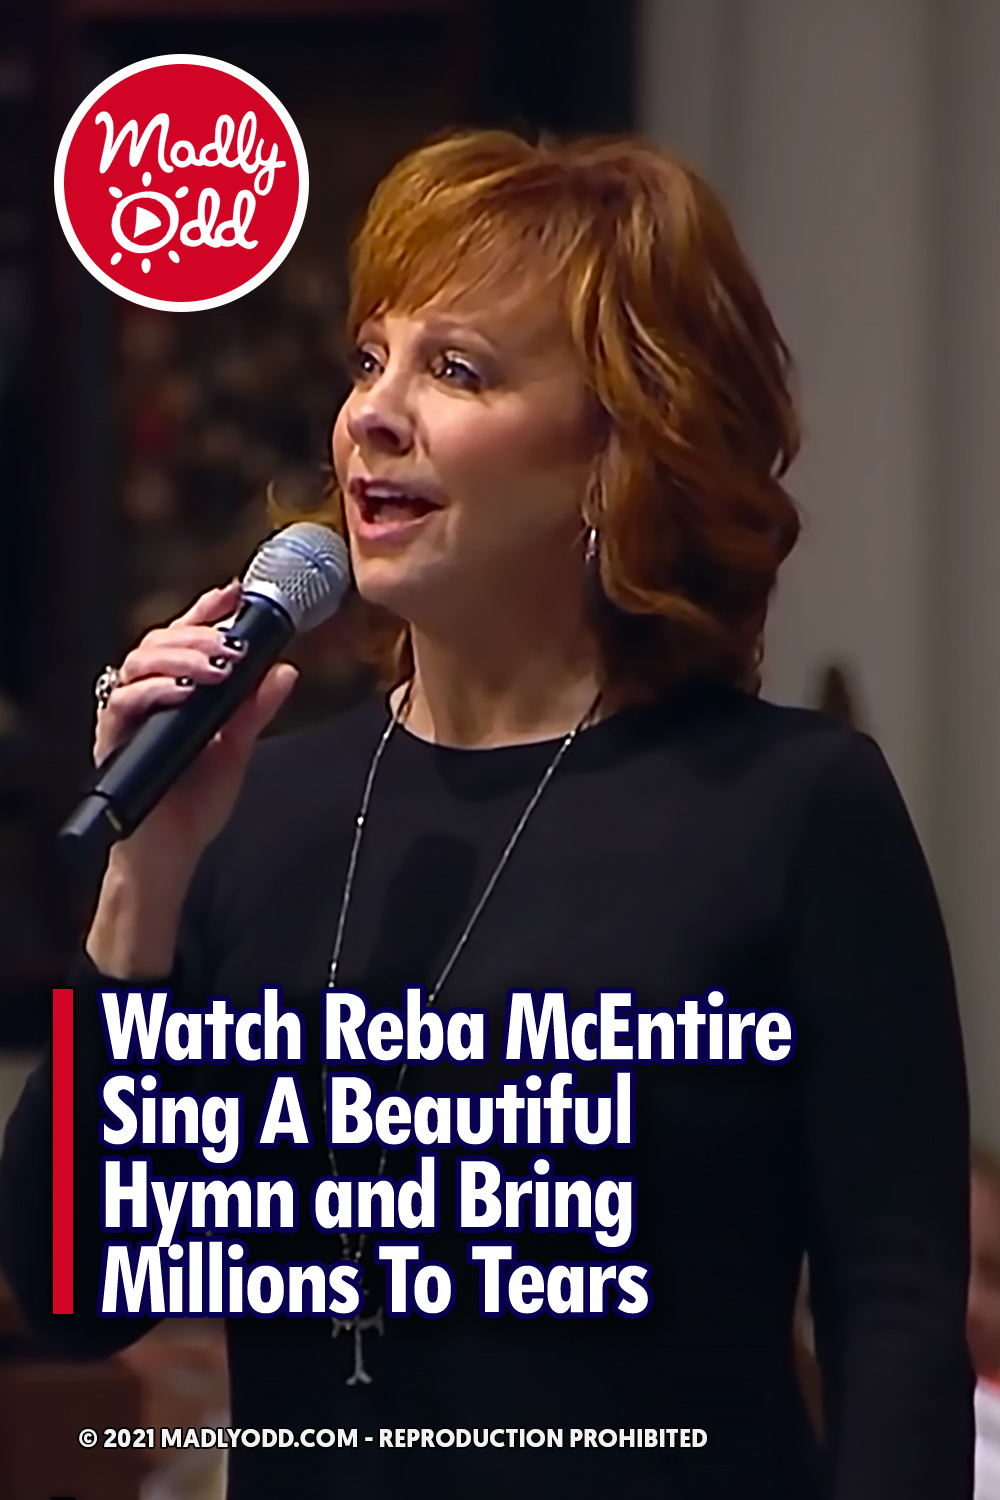 Watch Reba McEntire Sing A Beautiful Hymn and Bring Millions To Tears